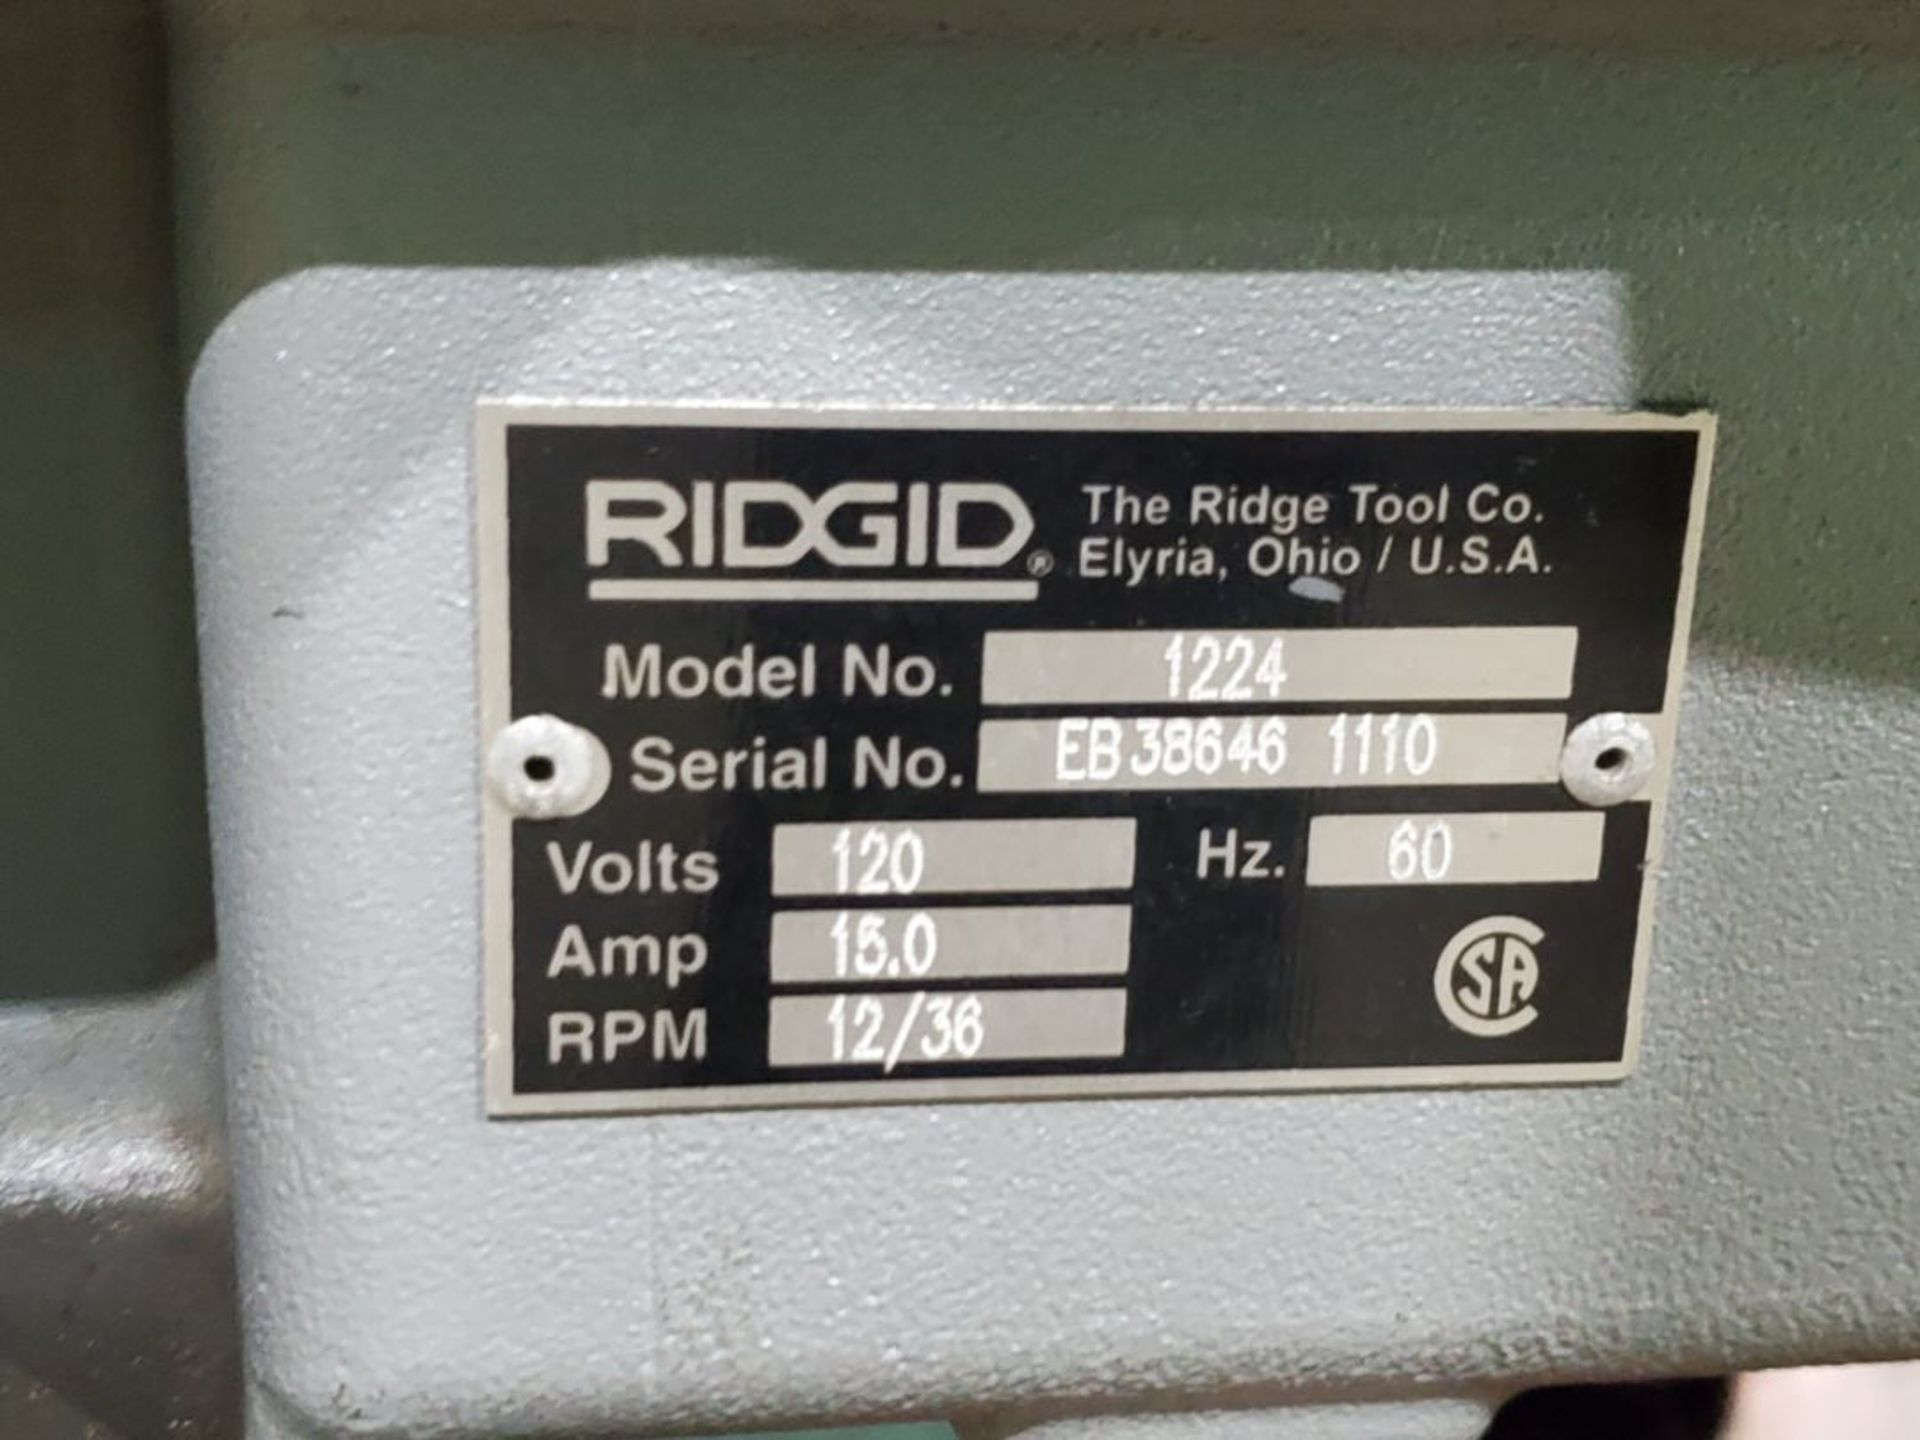 Ridgid 1224 Rolling Pipe Threader Up To 4" Cap.; 60HZ, 120V, 15A, 12/36RPM; W/ Foot Controller - Image 11 of 12